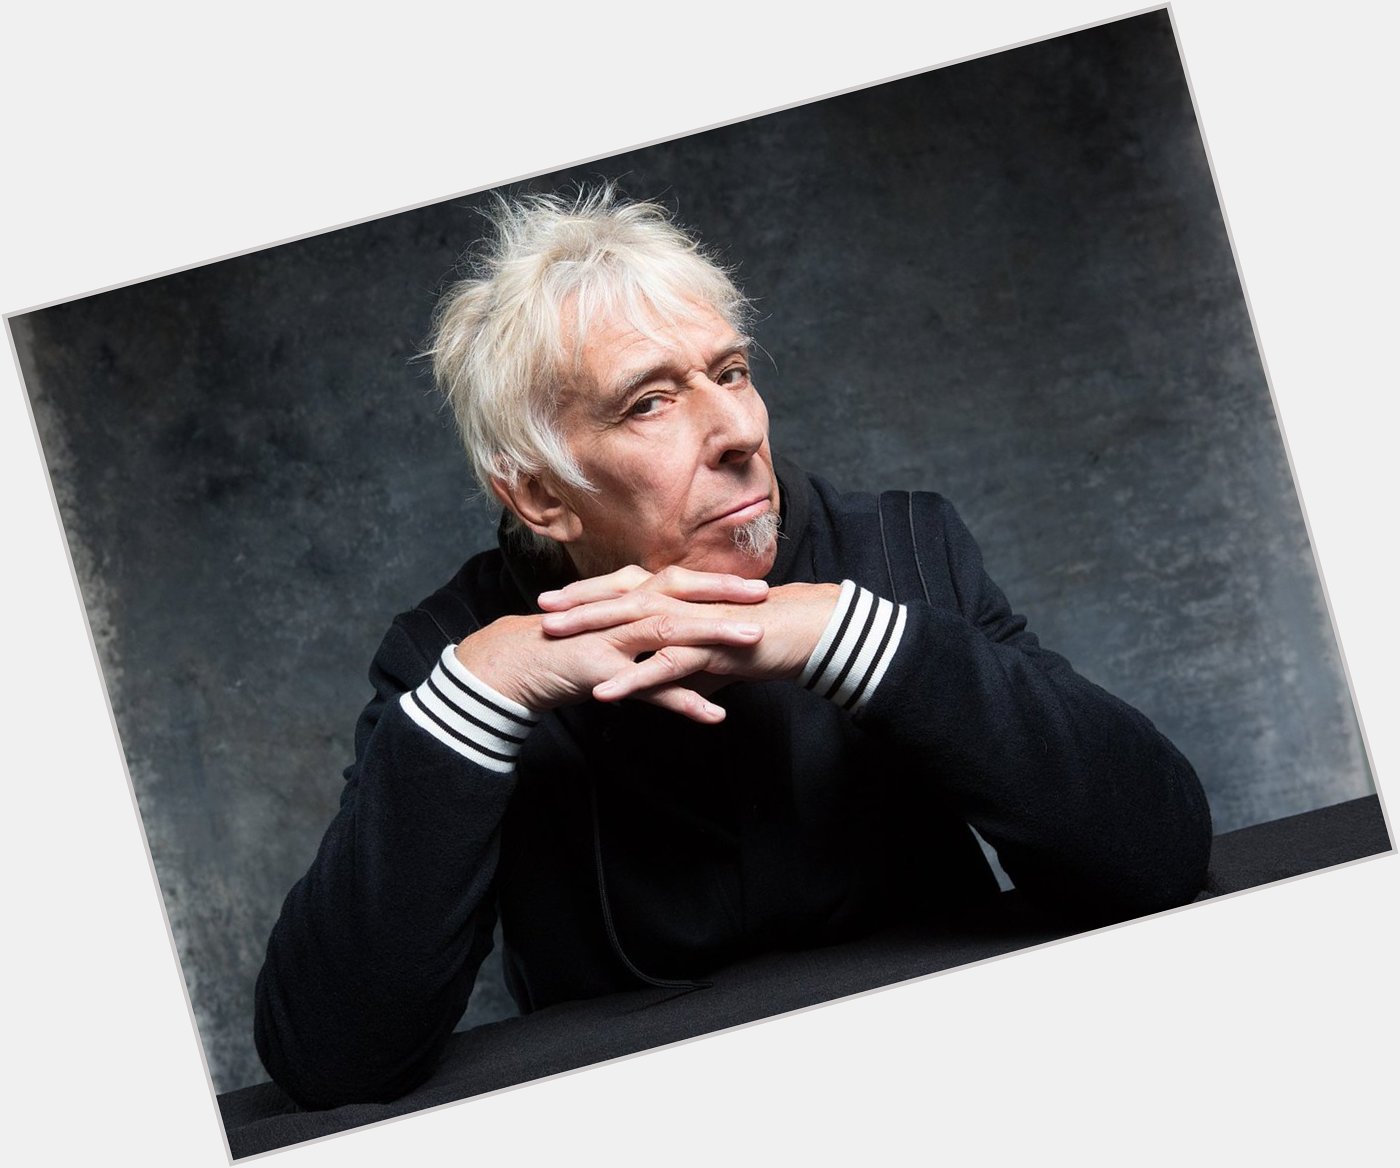  Happy birthday to one of the greats.

John Cale 